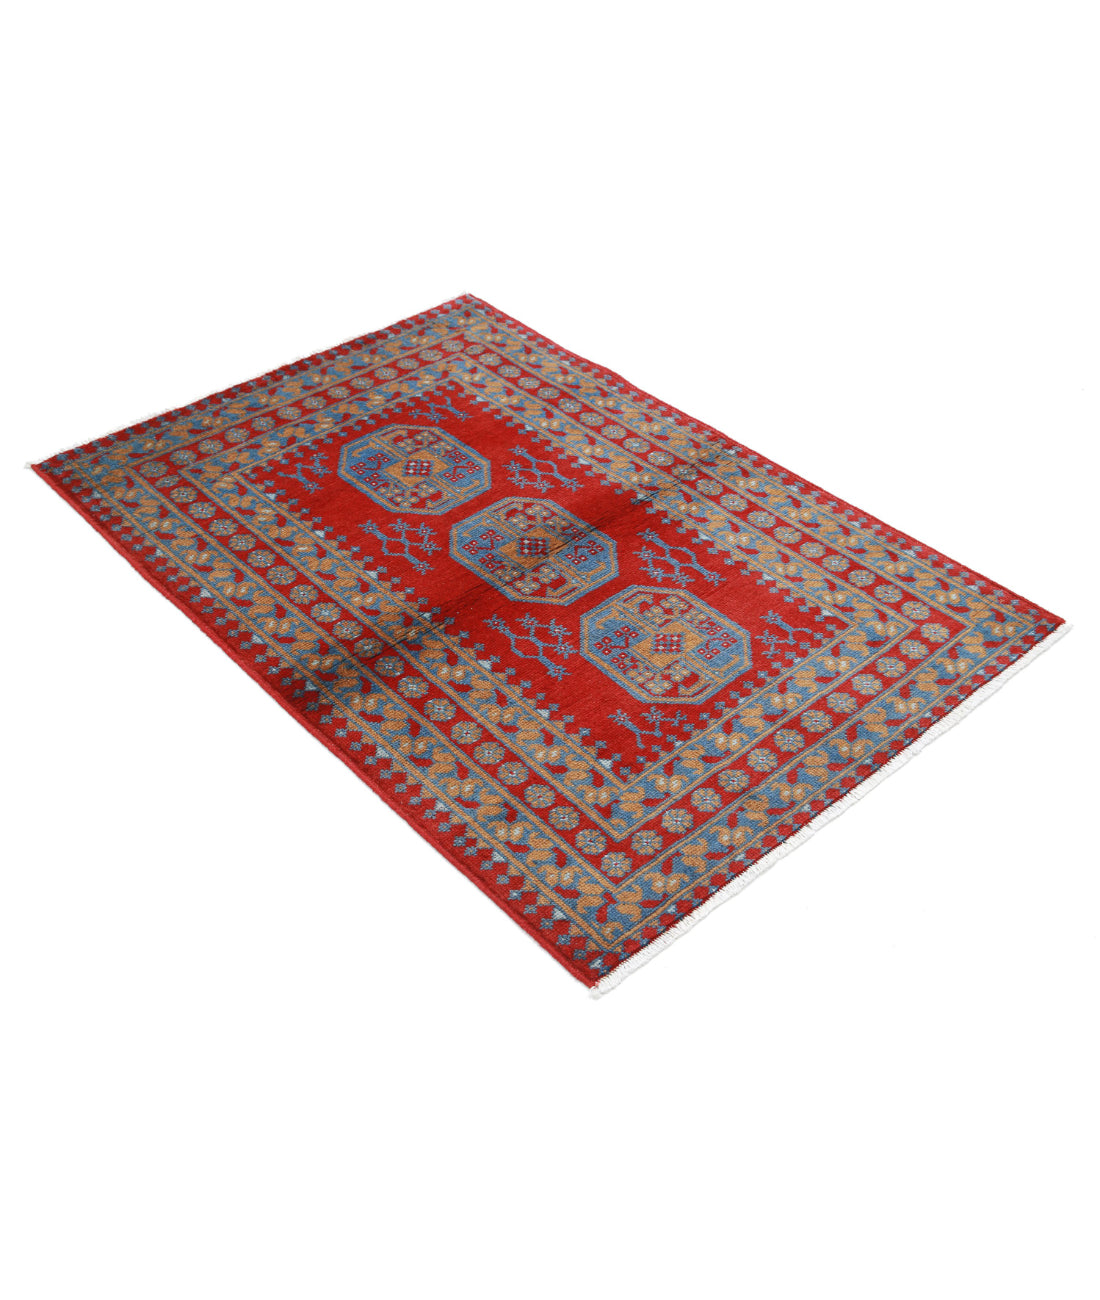 Revival 3'4'' X 4'9'' Hand-Knotted Wool Rug 3'4'' x 4'9'' (100 X 143) / Red / Blue